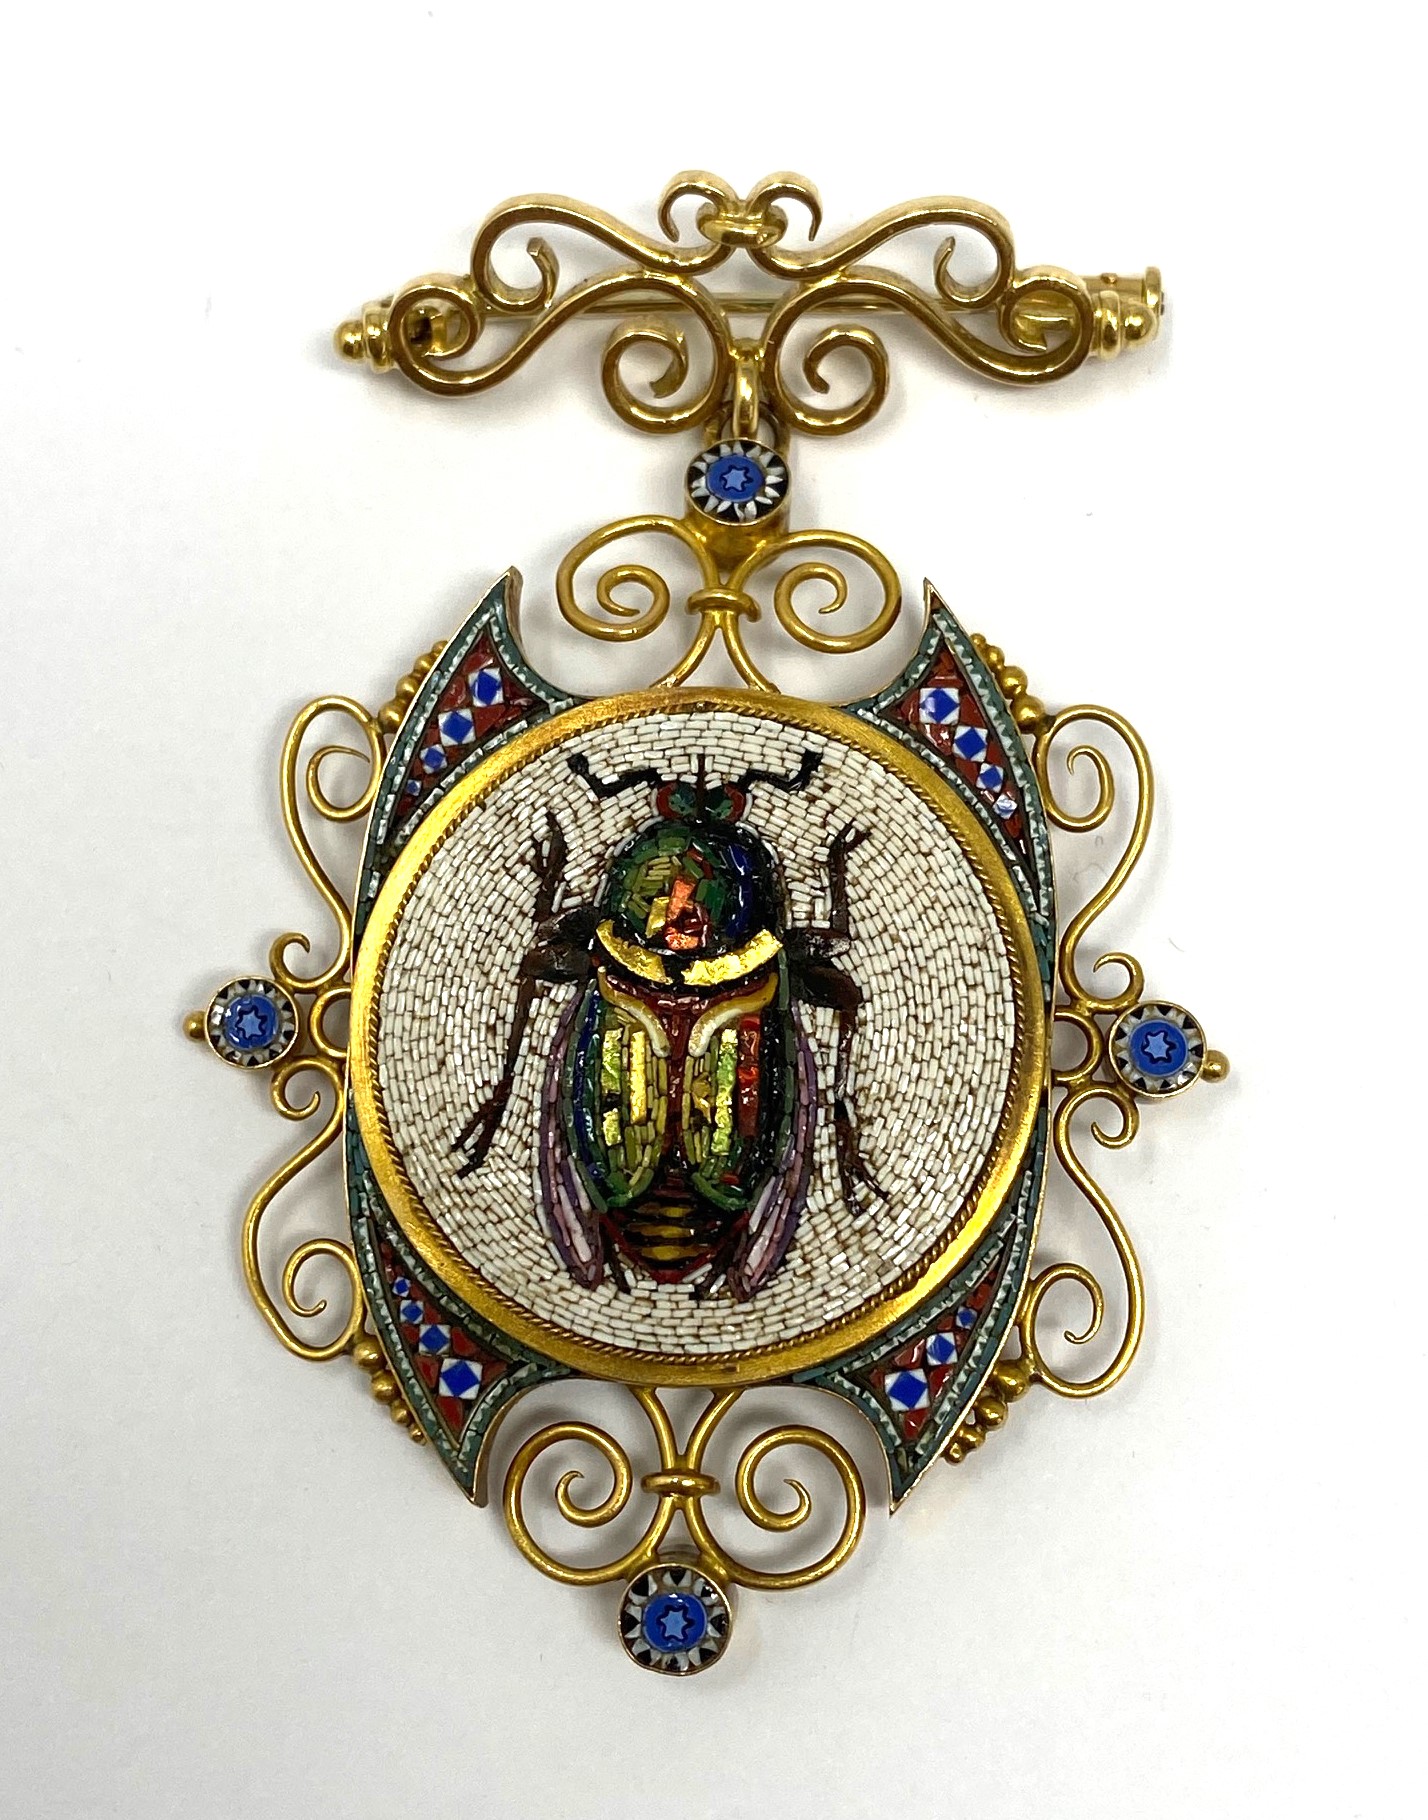 MICRO-MOSAIC AND GOLD PENDANT/BROOCH, 1870s - Image 3 of 4